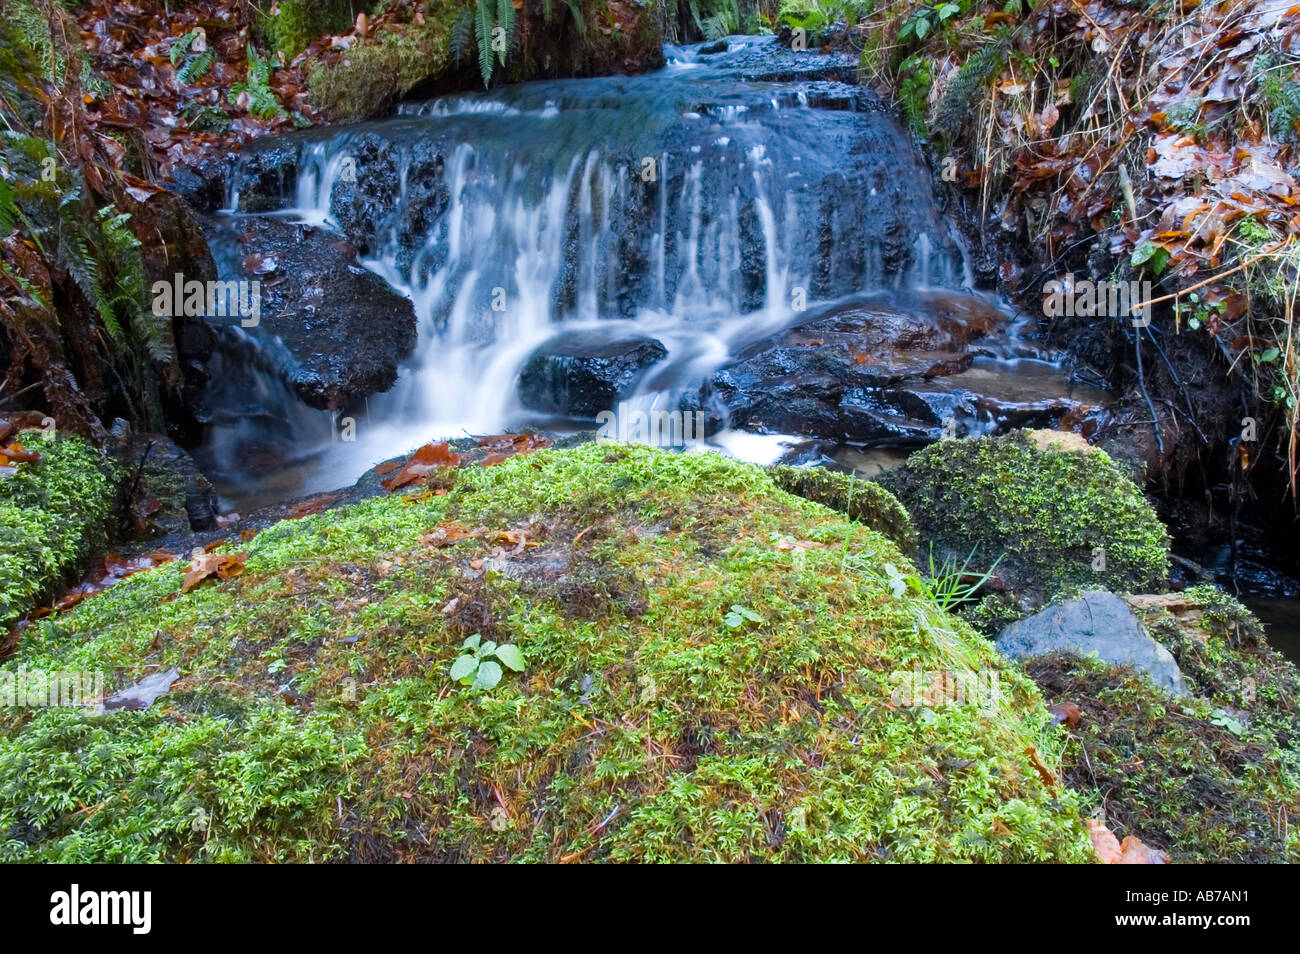 Waterfall at Hamsterley forest with rock covered with  moss in foreground Stock Photo